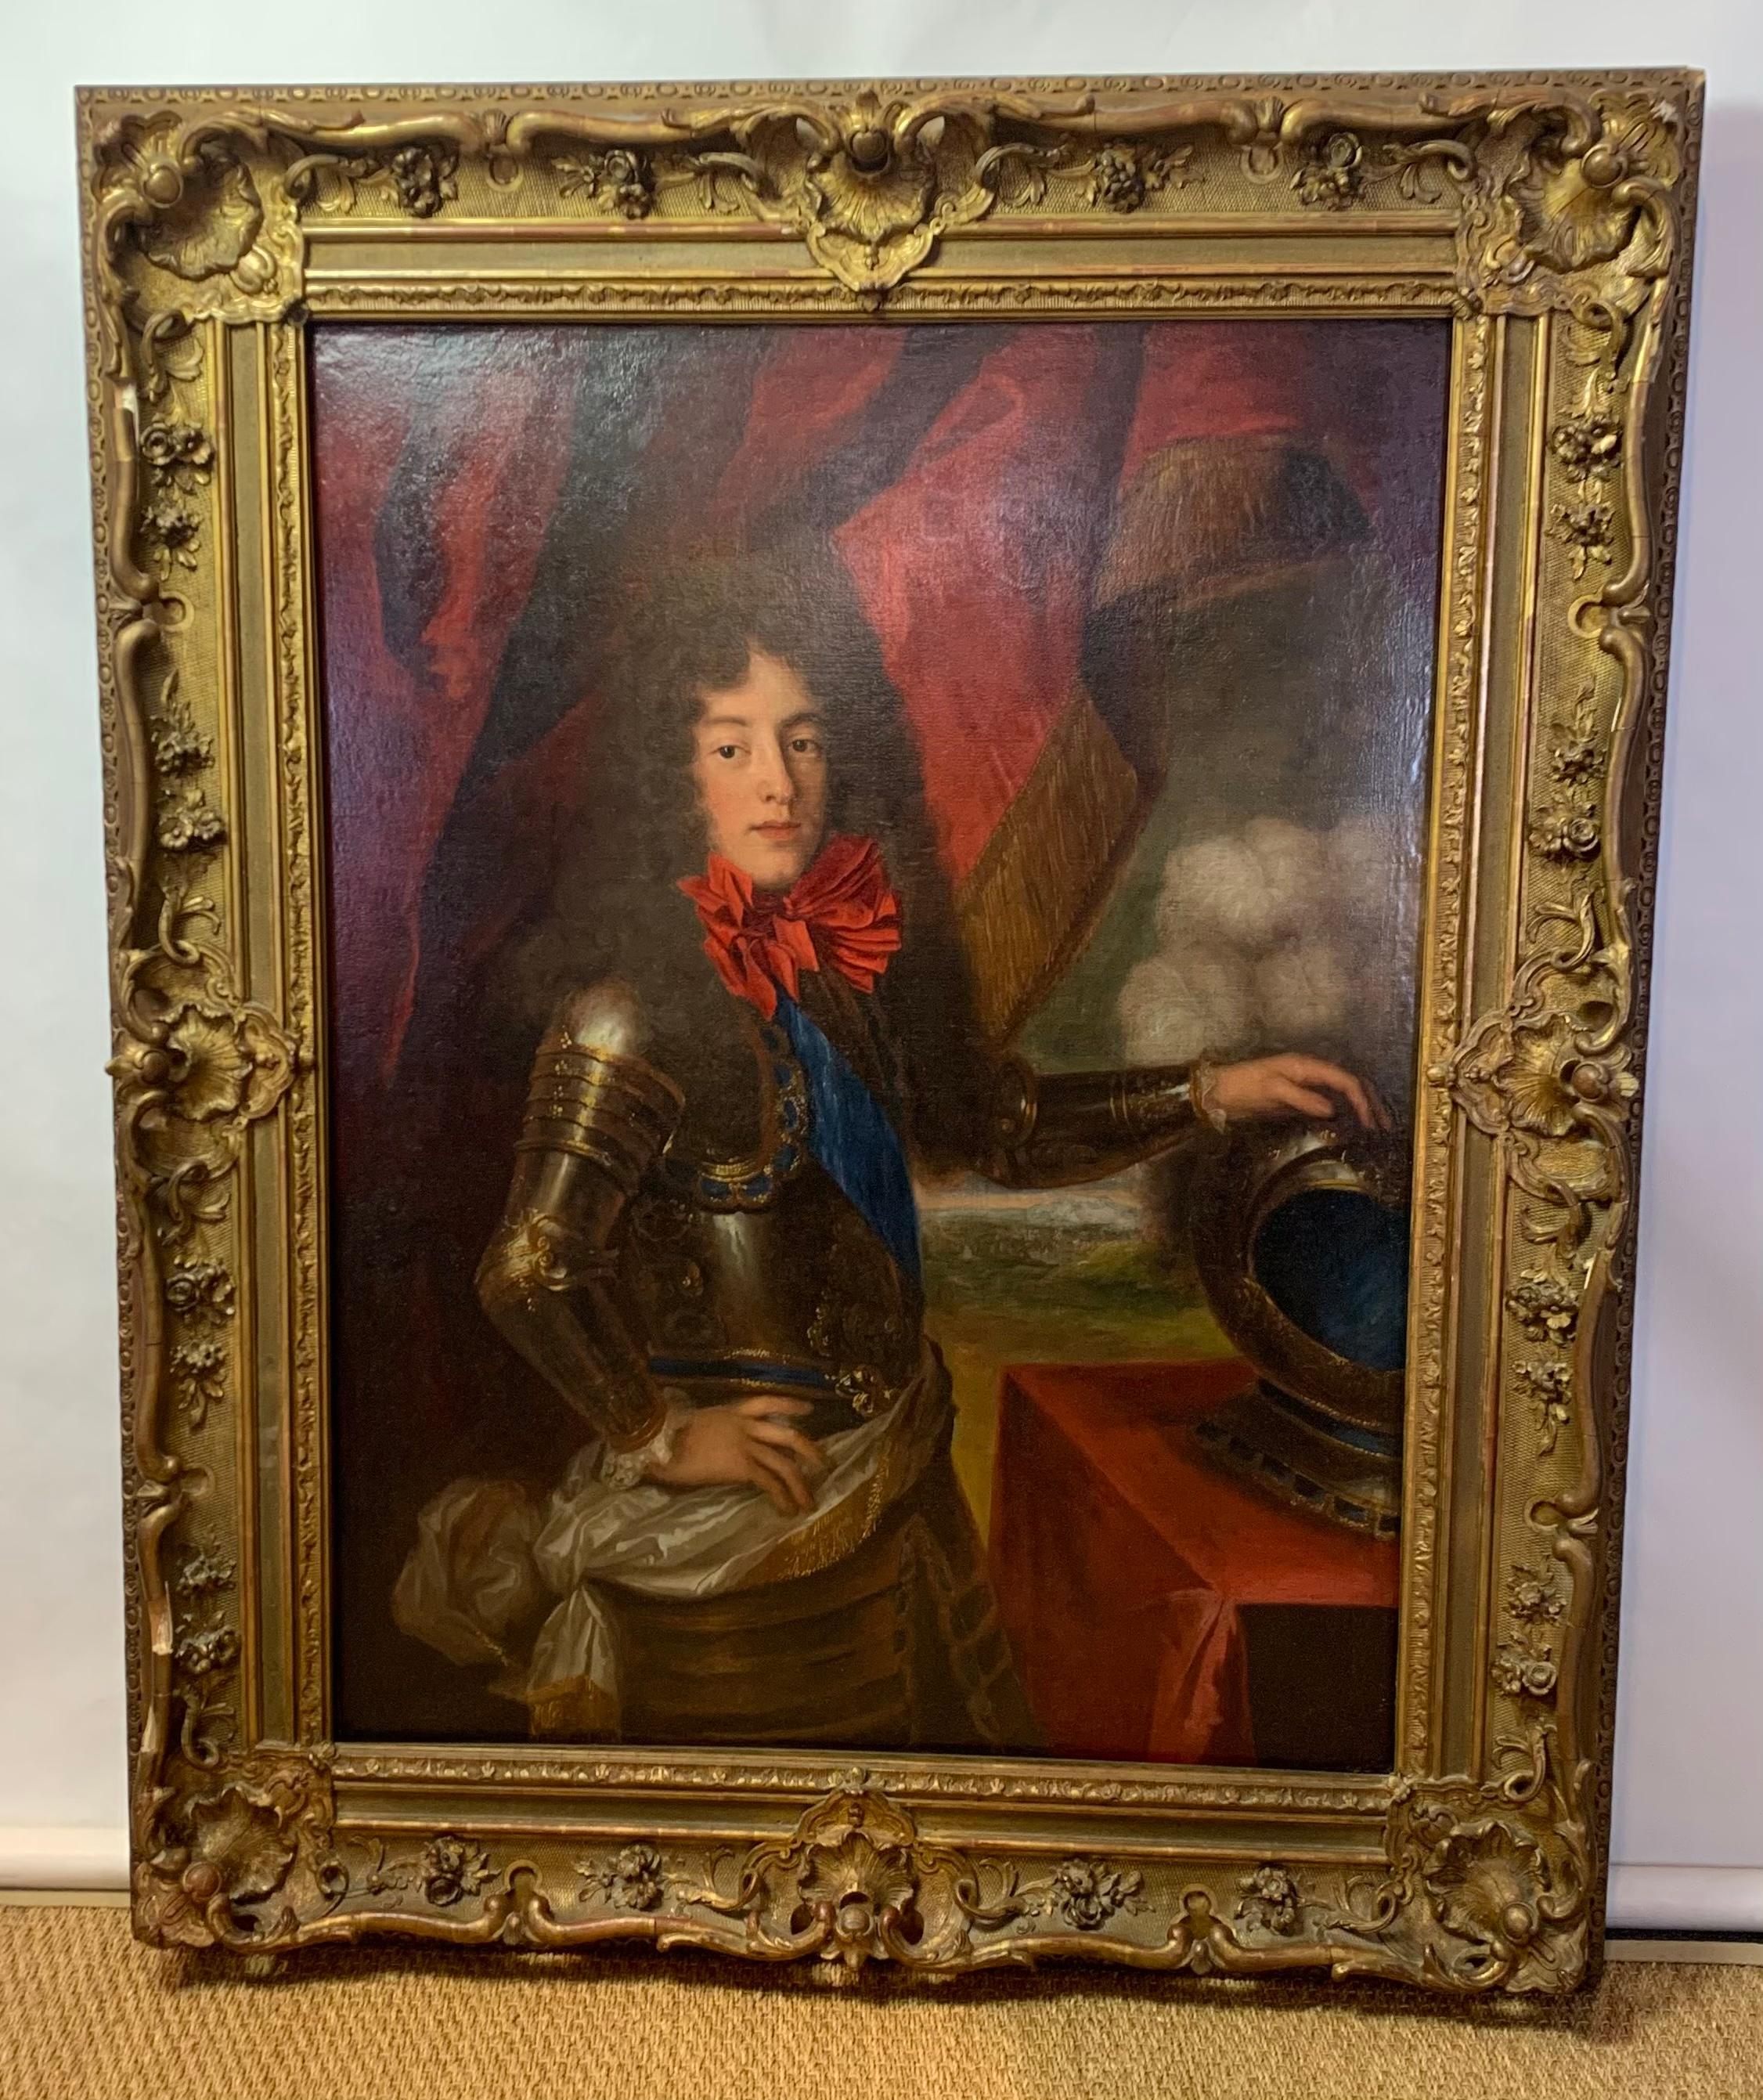 A large 18th century oil on canvas painting of Louis, Prince of Condé, dressed in full battle armor in an elaborately carved gilt wood frame.